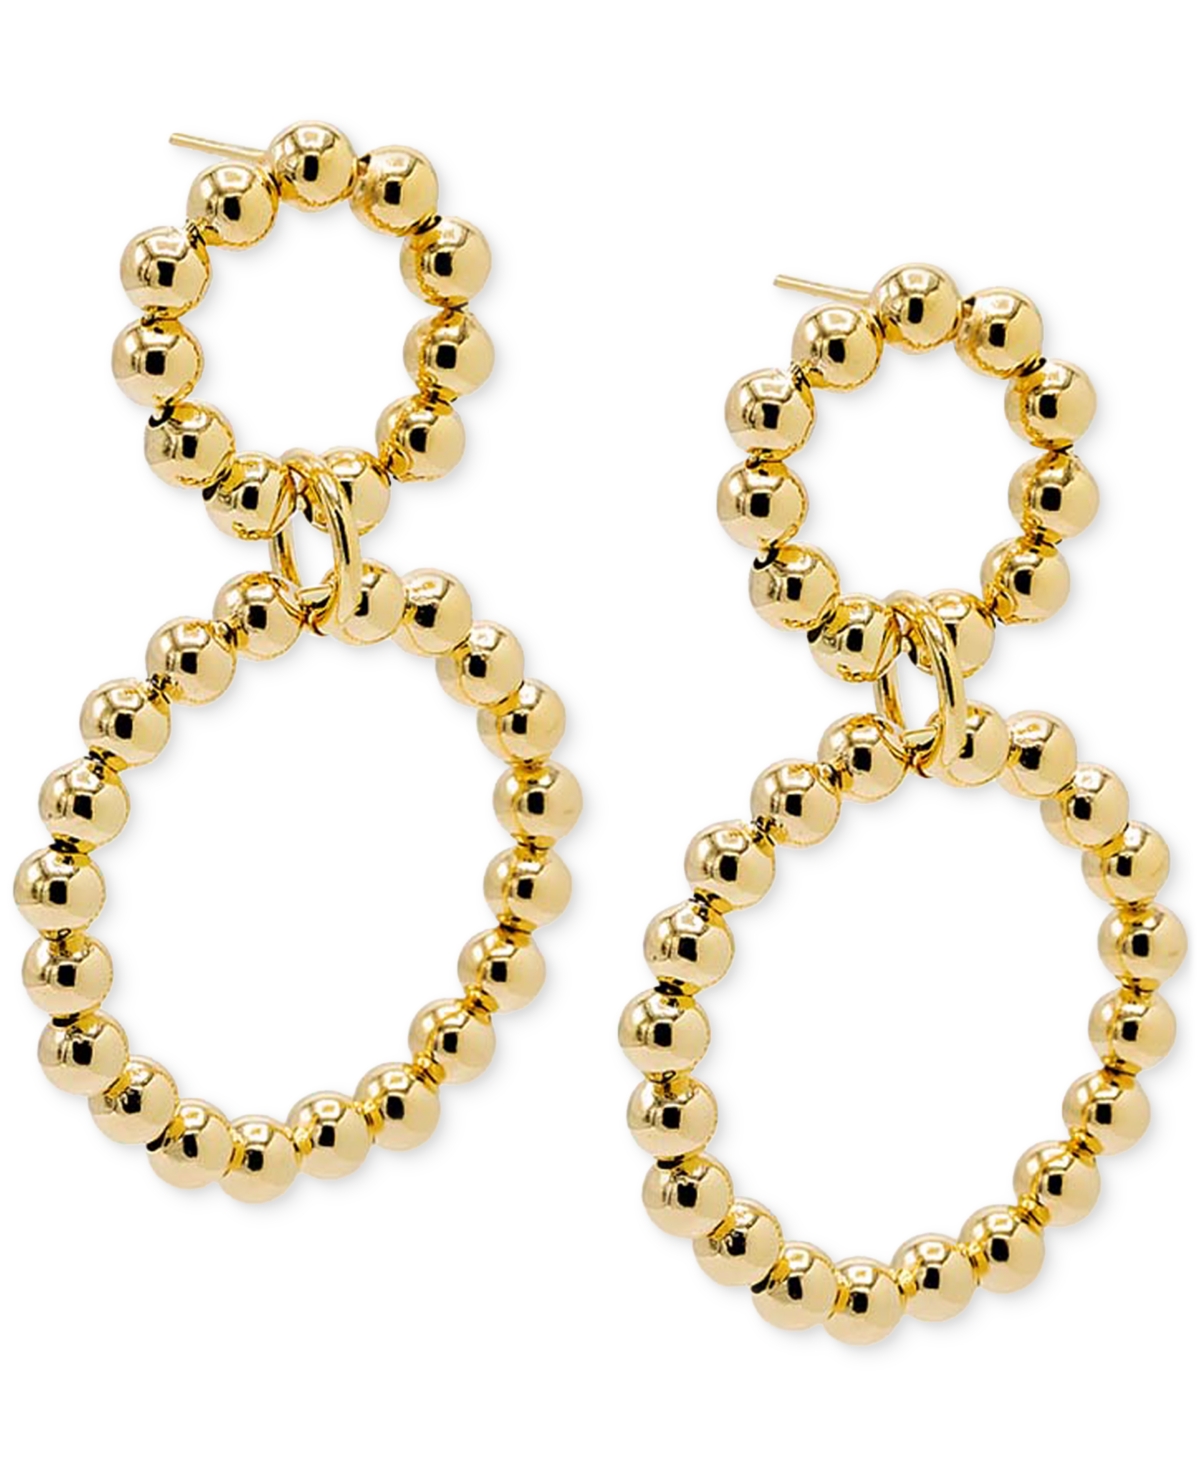 By Adina Eden 14k Gold-plated Beaded Double Circle Drop Earrings